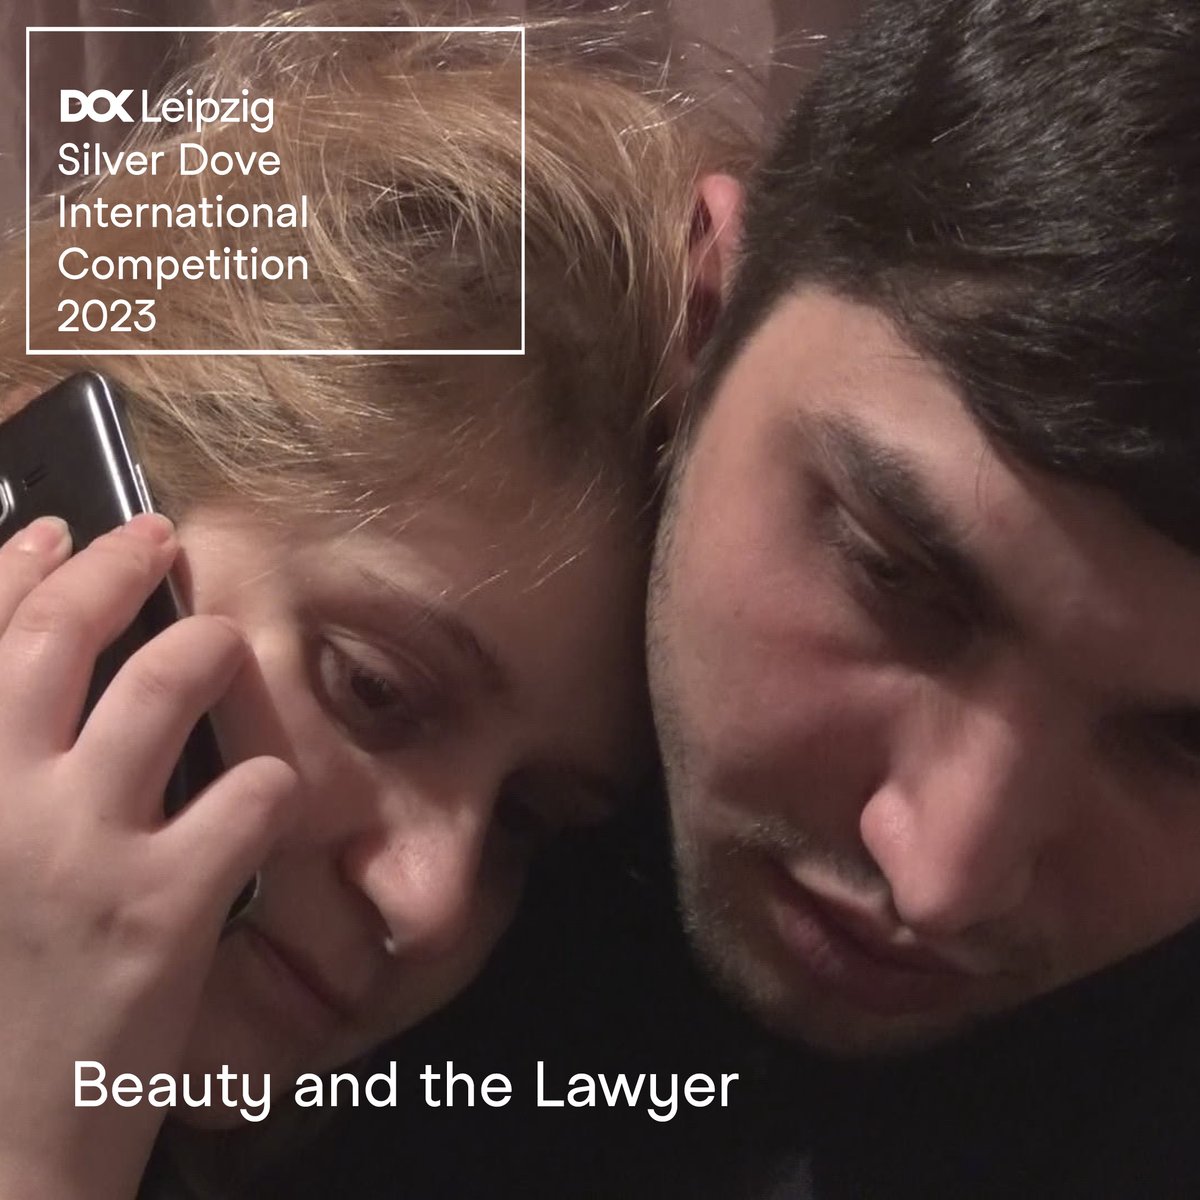 And now: The Silver Dove Feature-Length Film, sponsored by @3sat, for the best feature-length documentary by an up-and-coming director, was awarded to... Hovhannes Ishkhanyan for “Beauty and the Lawyer”. Congrats @hov0596!